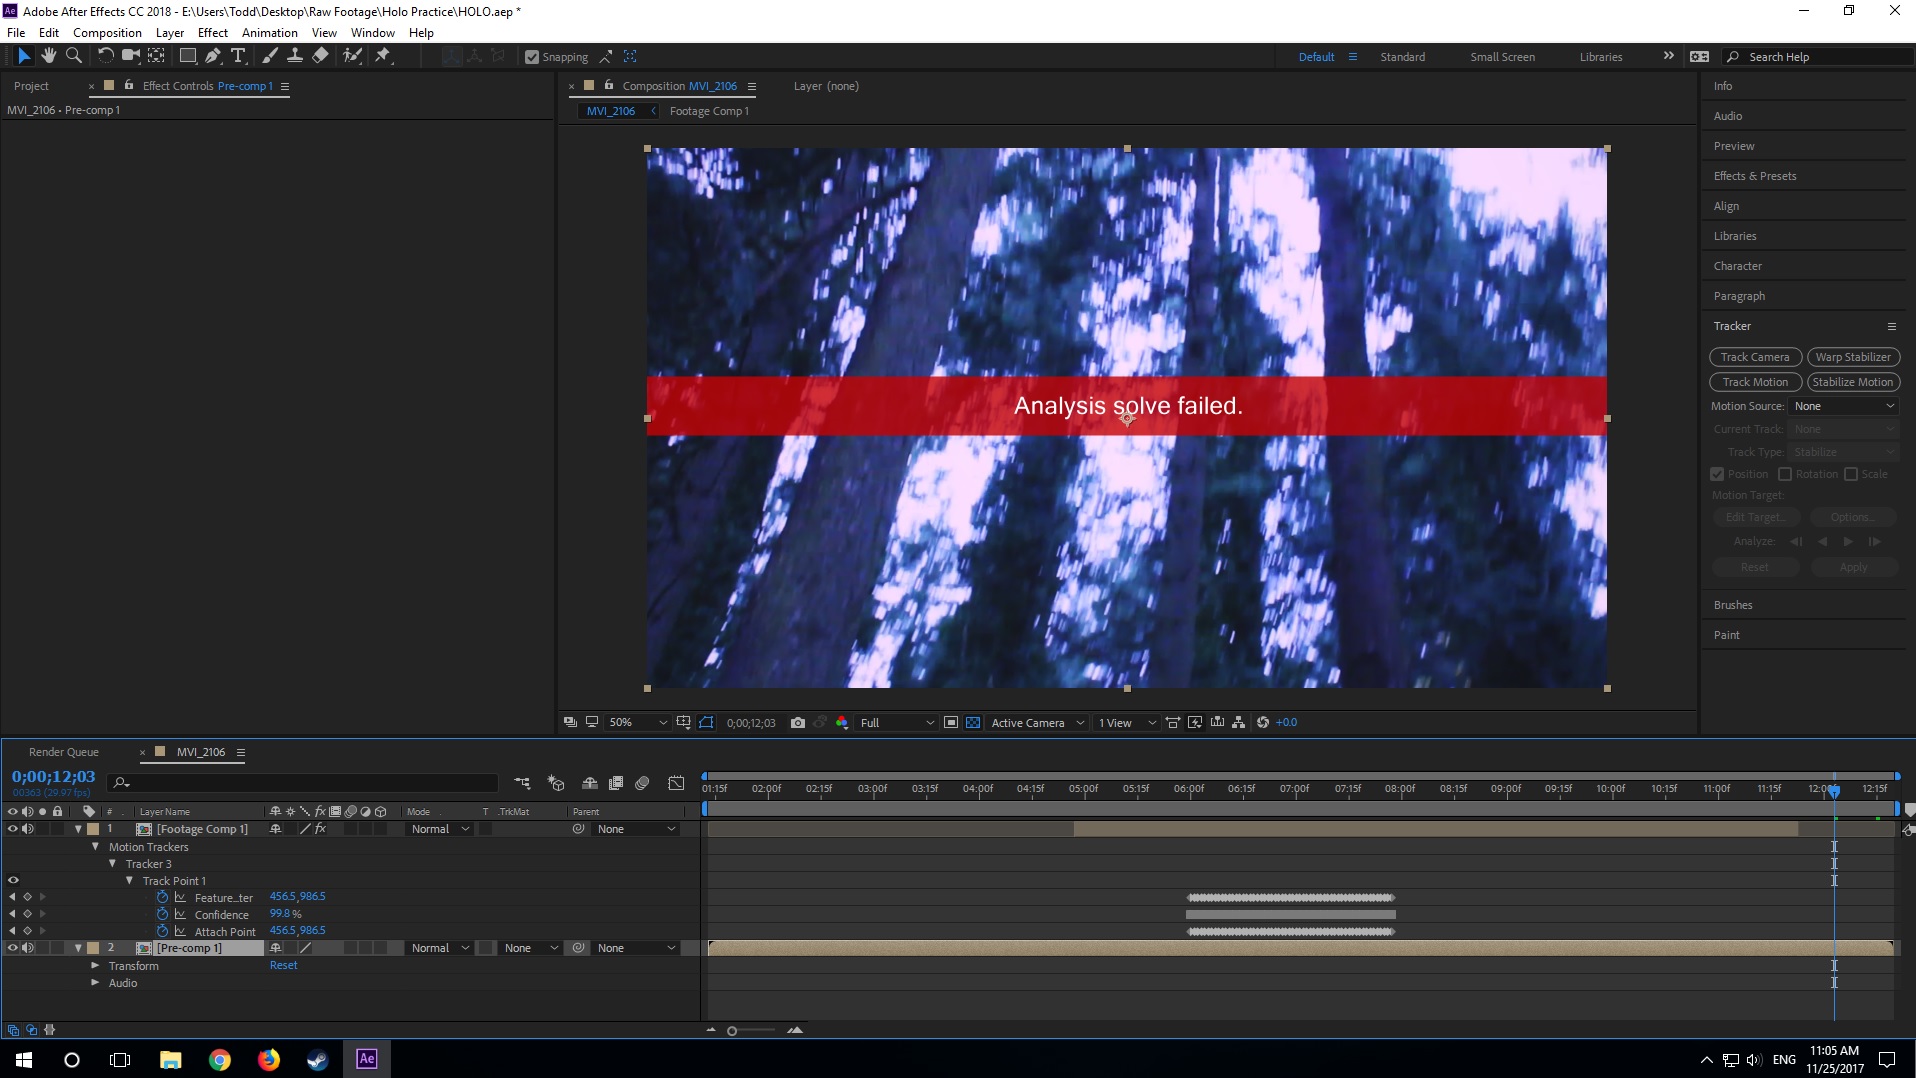 Solved: Re: Toggle Full Screen After Effects - Adobe Community - 9494971